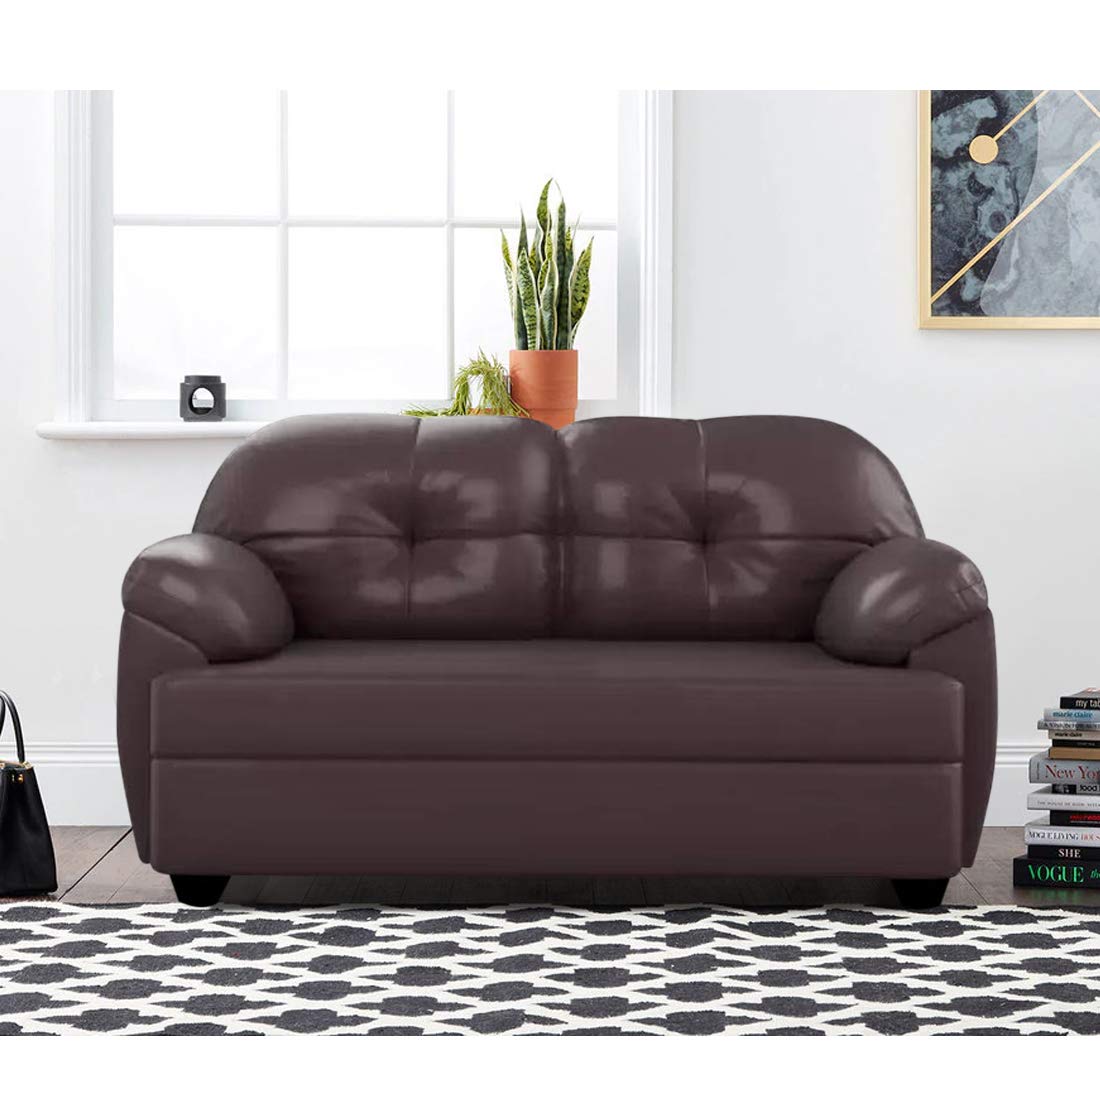       2 Seater Sofas: Buy 2 Seater Sofa Online @Best Prices in India! – GKW Retail